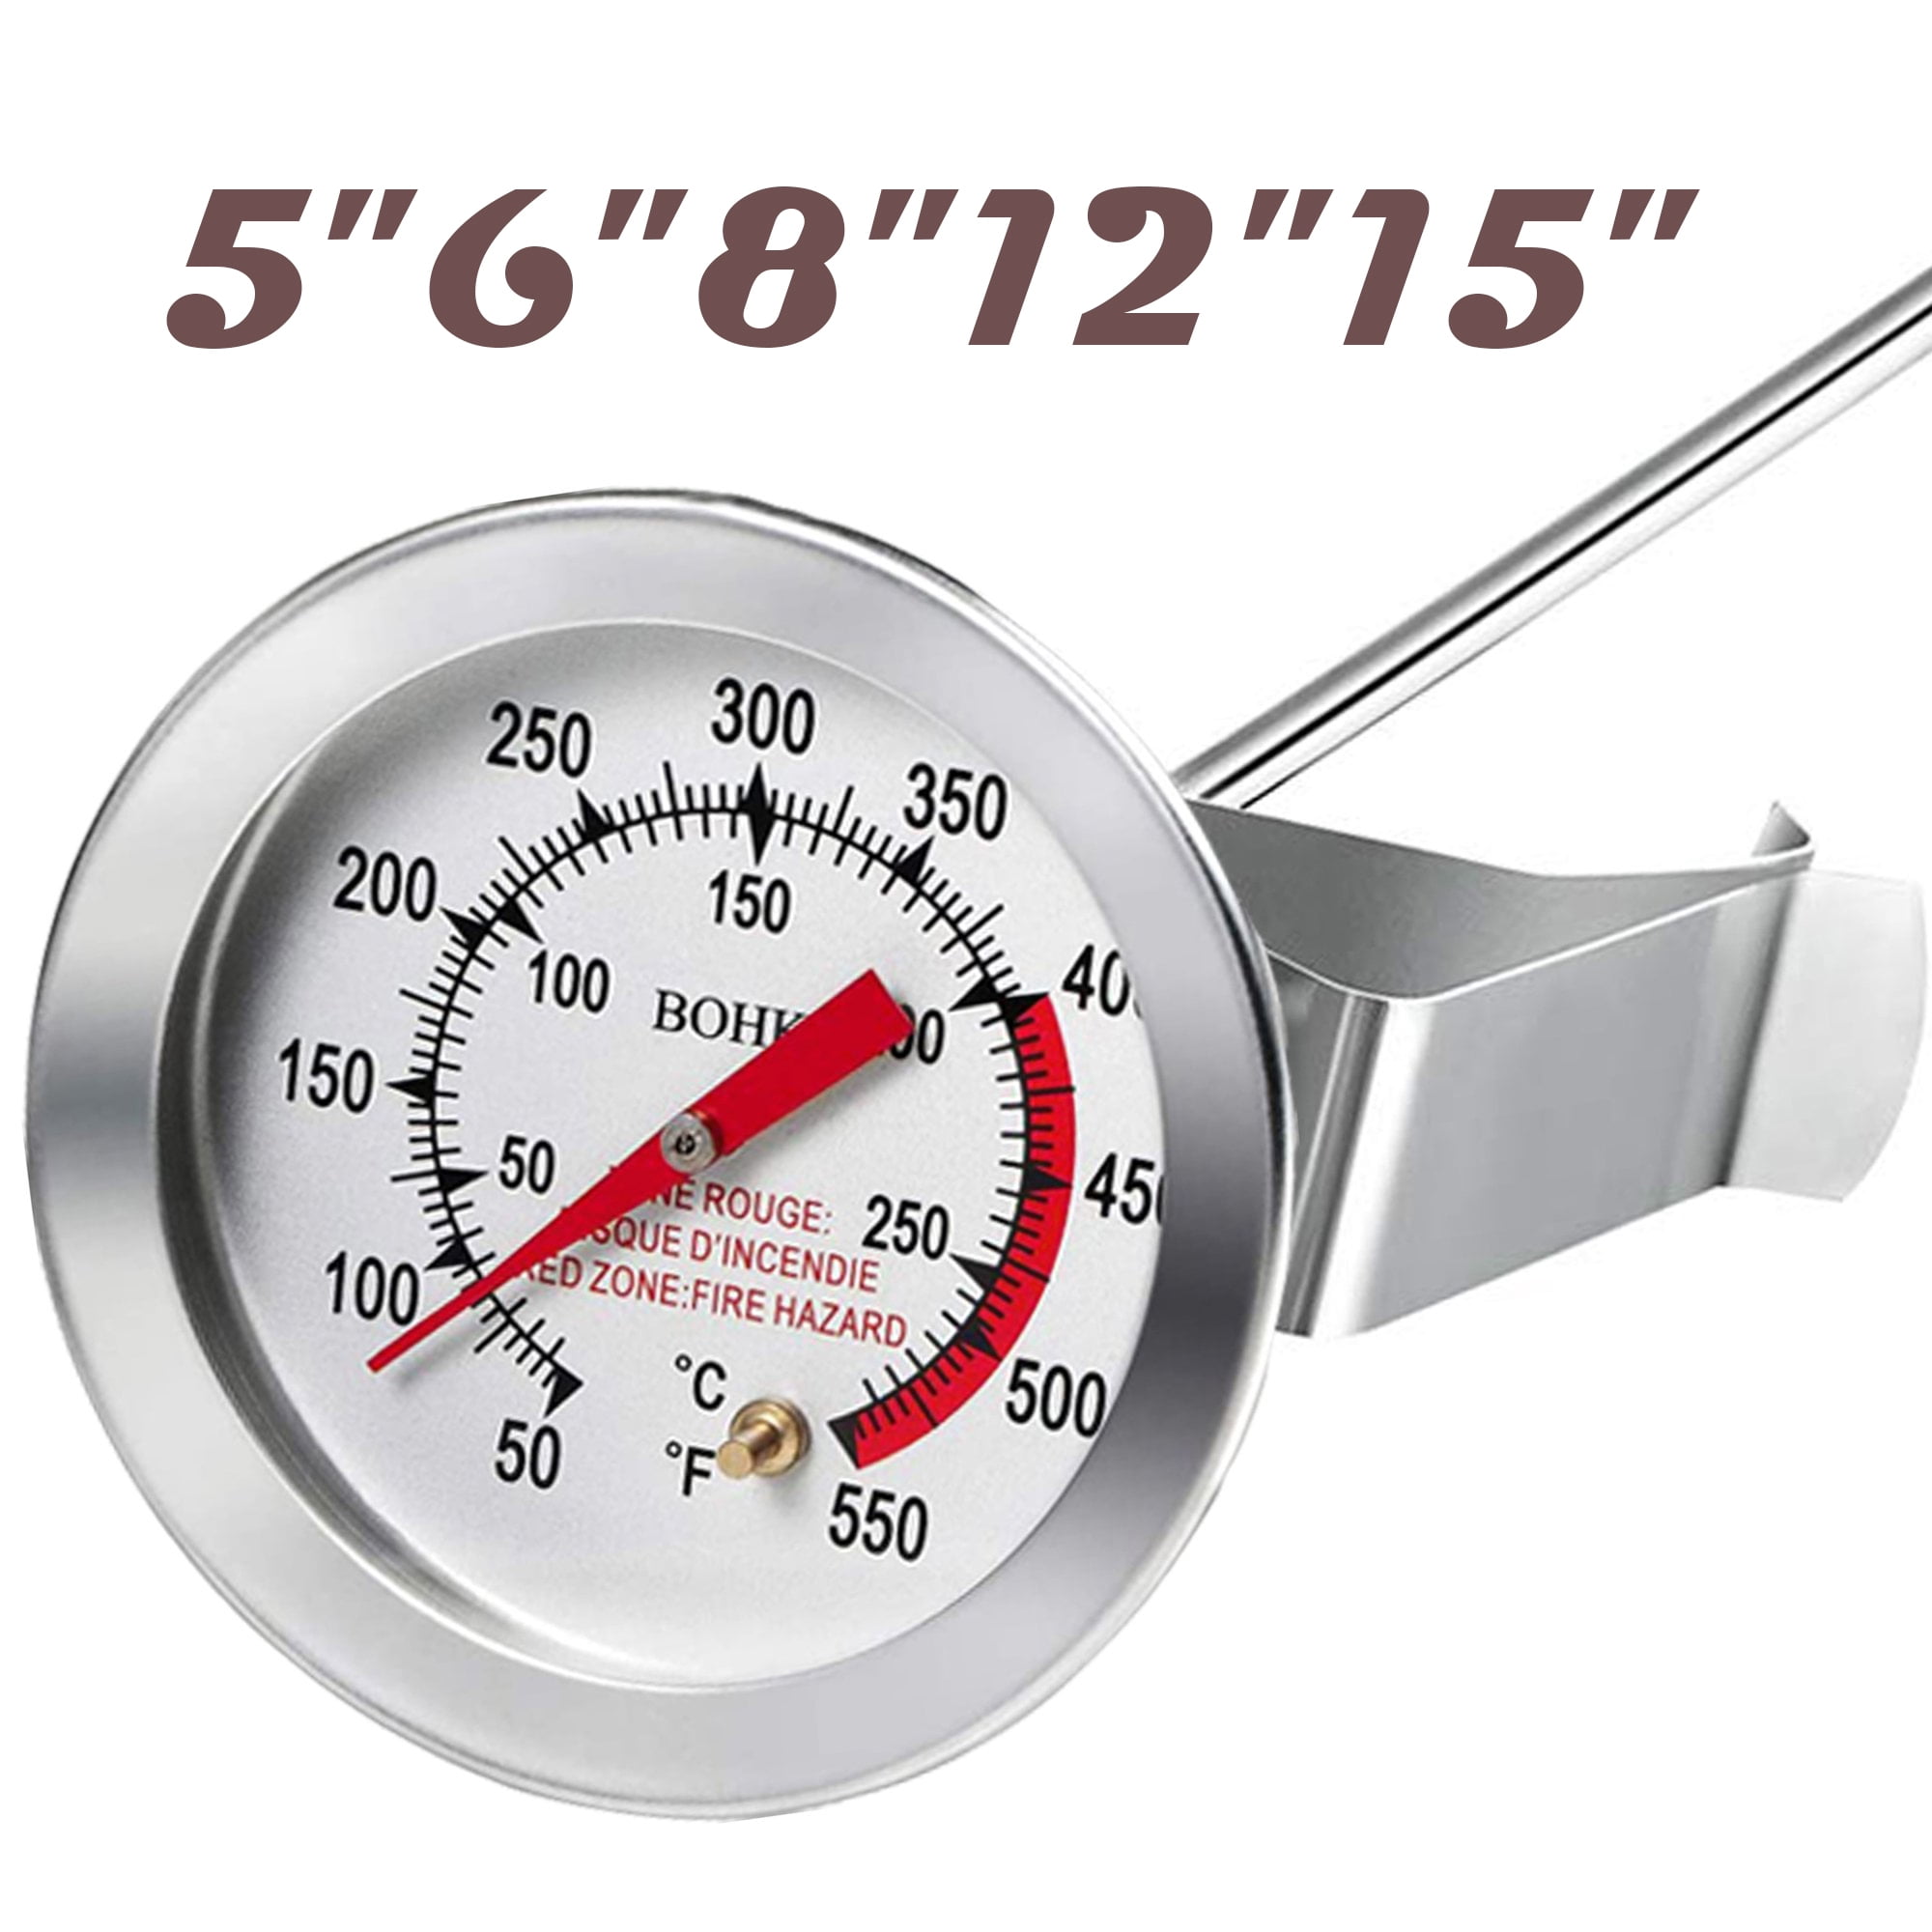 12 Long Probe Food Grade S.Steel Dial Thermometer for Home brew Cheese  Making